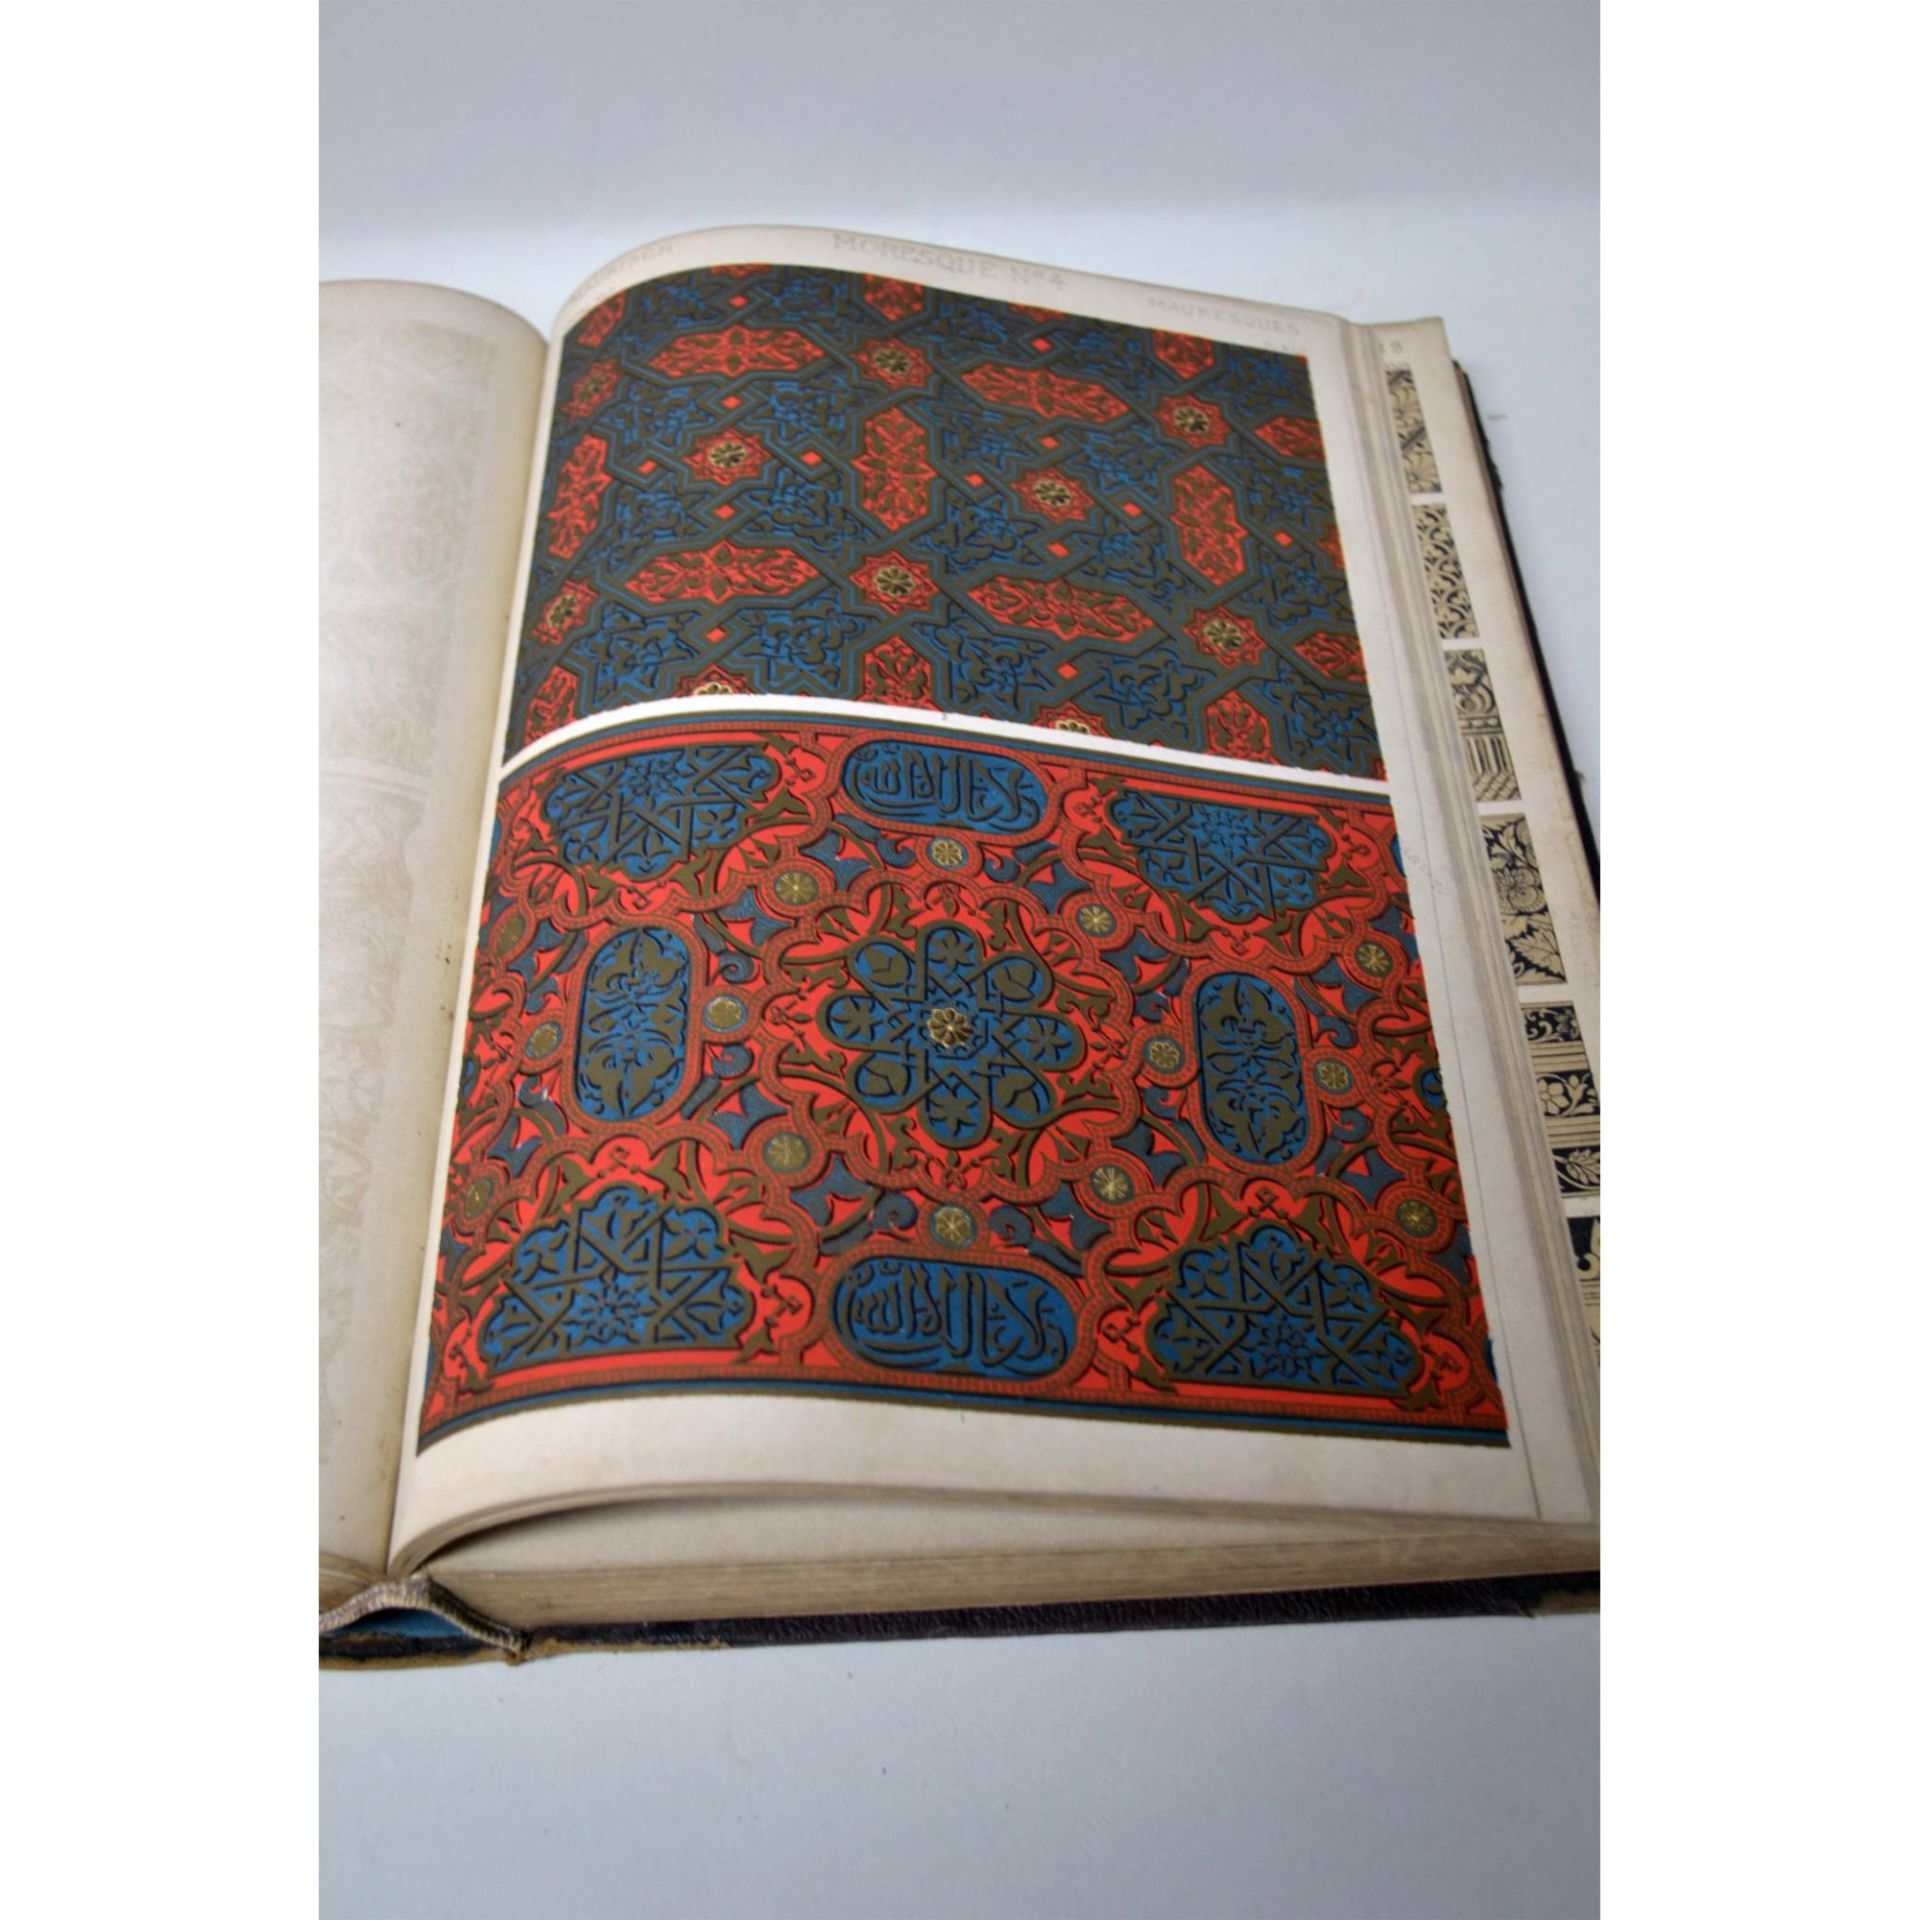 Antique Rare Book, "The Grammar Of The Ornament", 1868, With Color Engravings - Image 5 of 6